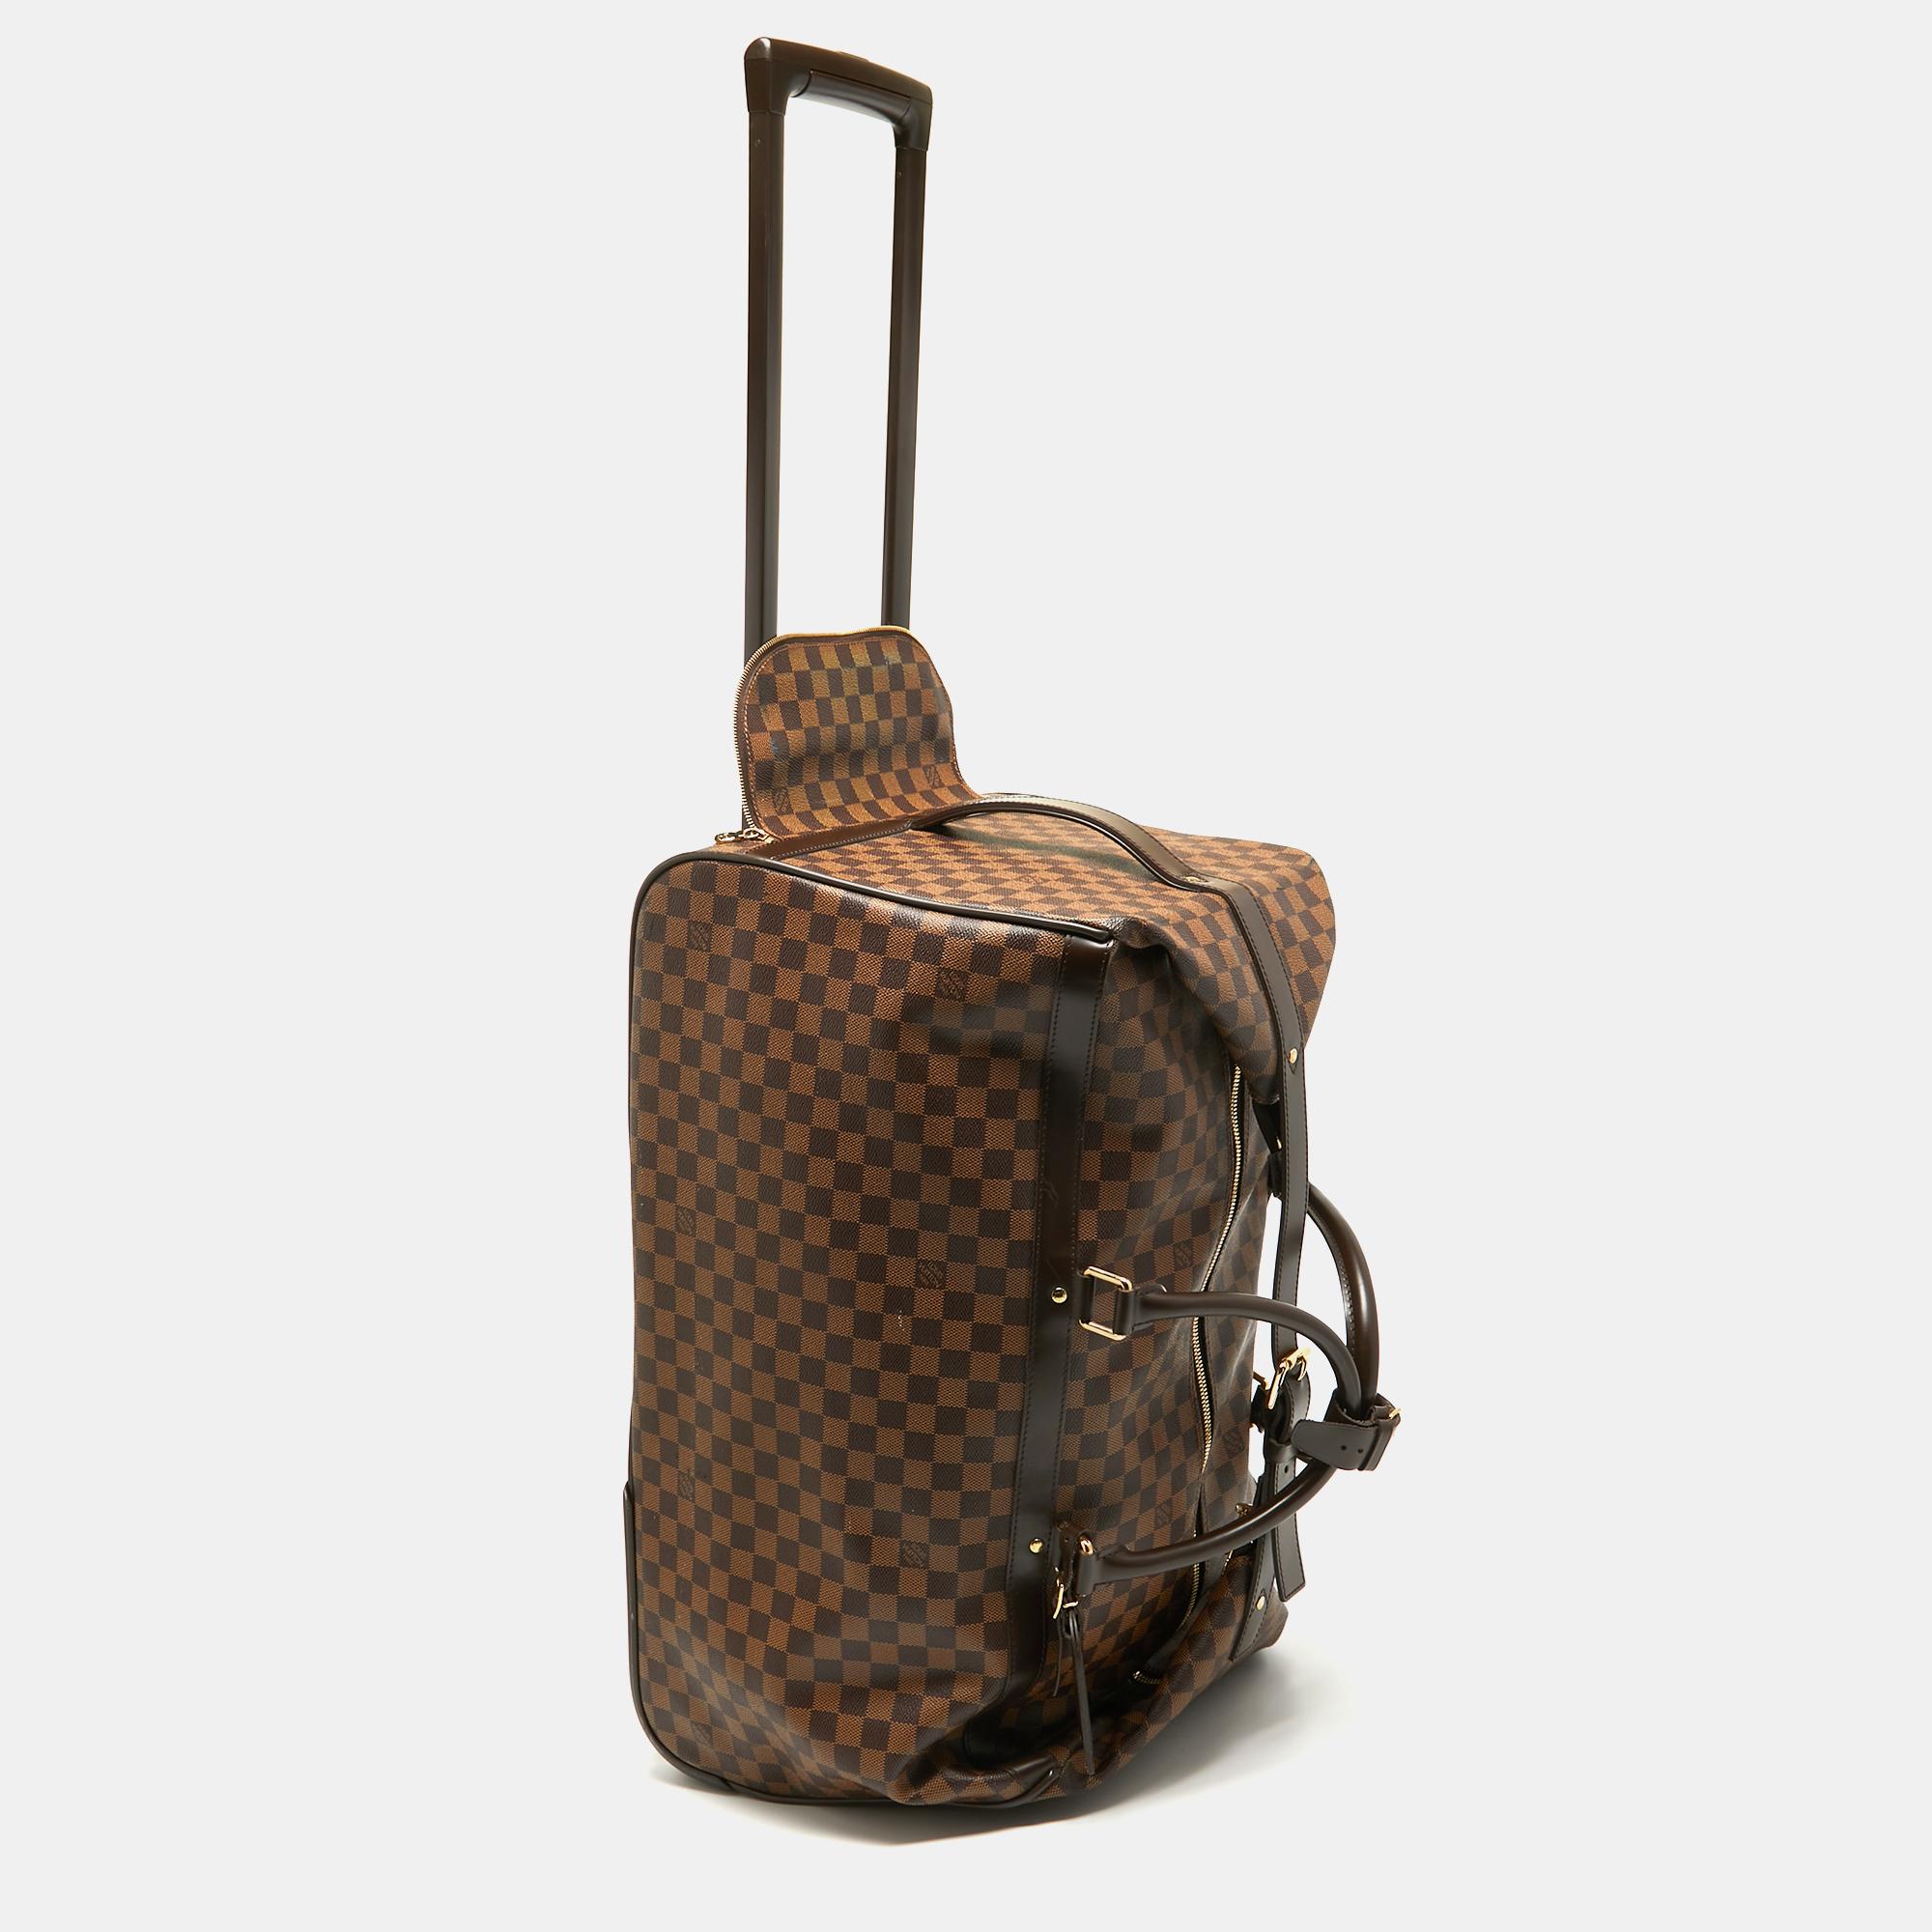 Featuring a chic, yet luxurious style, this Louis Vuitton Eole 60 luggage bag is distinctive. Crafted from signature Damier Ebene canvas and styled with leather, the bag is equipped with dual-rolled handles, trolly wheels, and a concealed handle